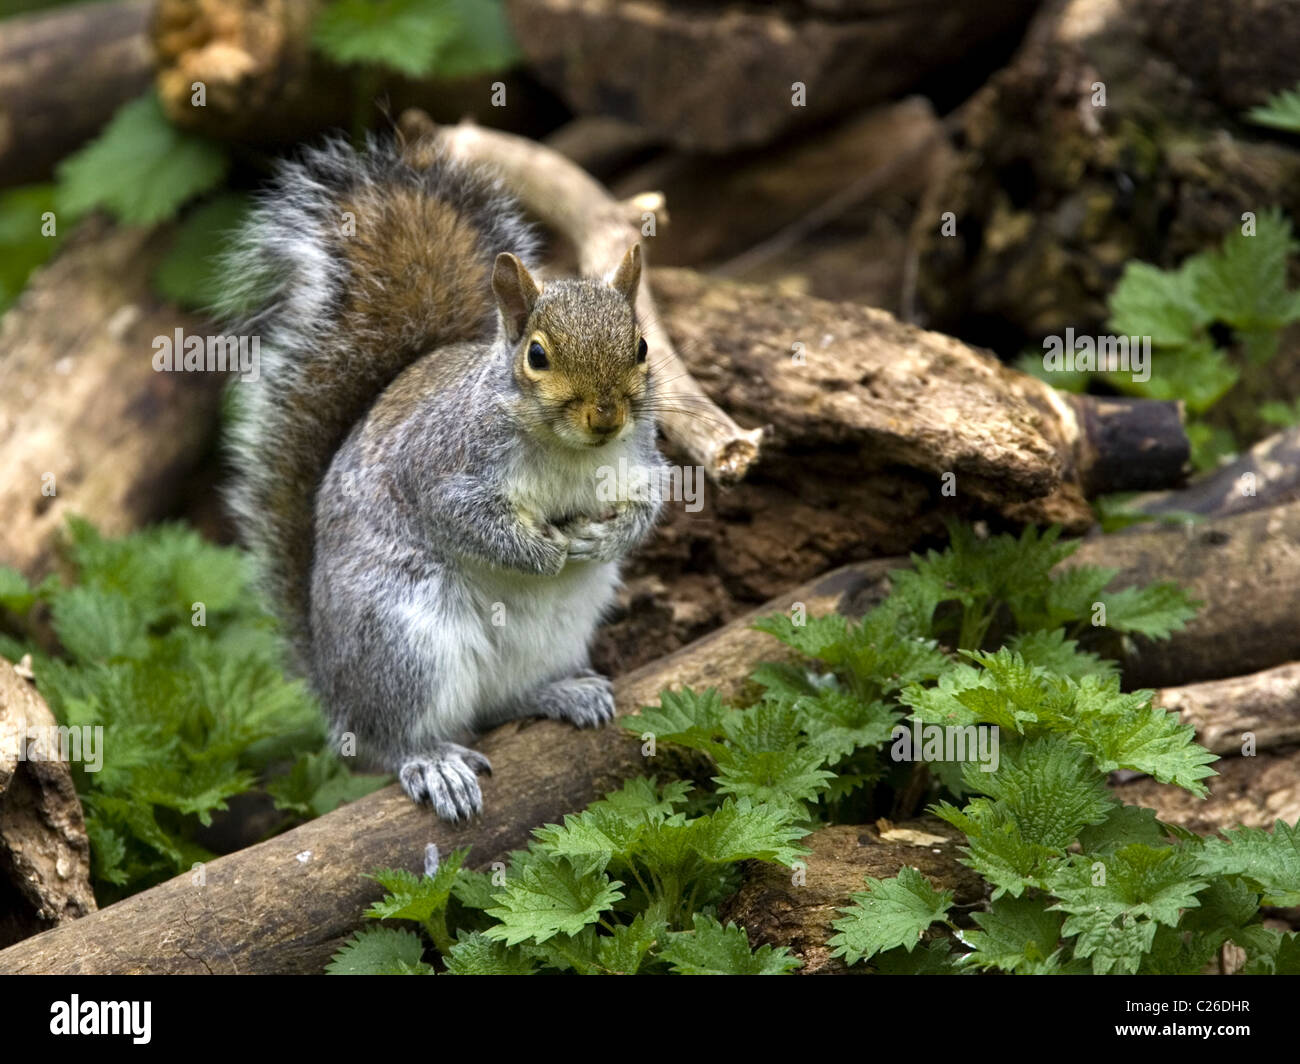 Grey squirrel with tail raised Stock Photo